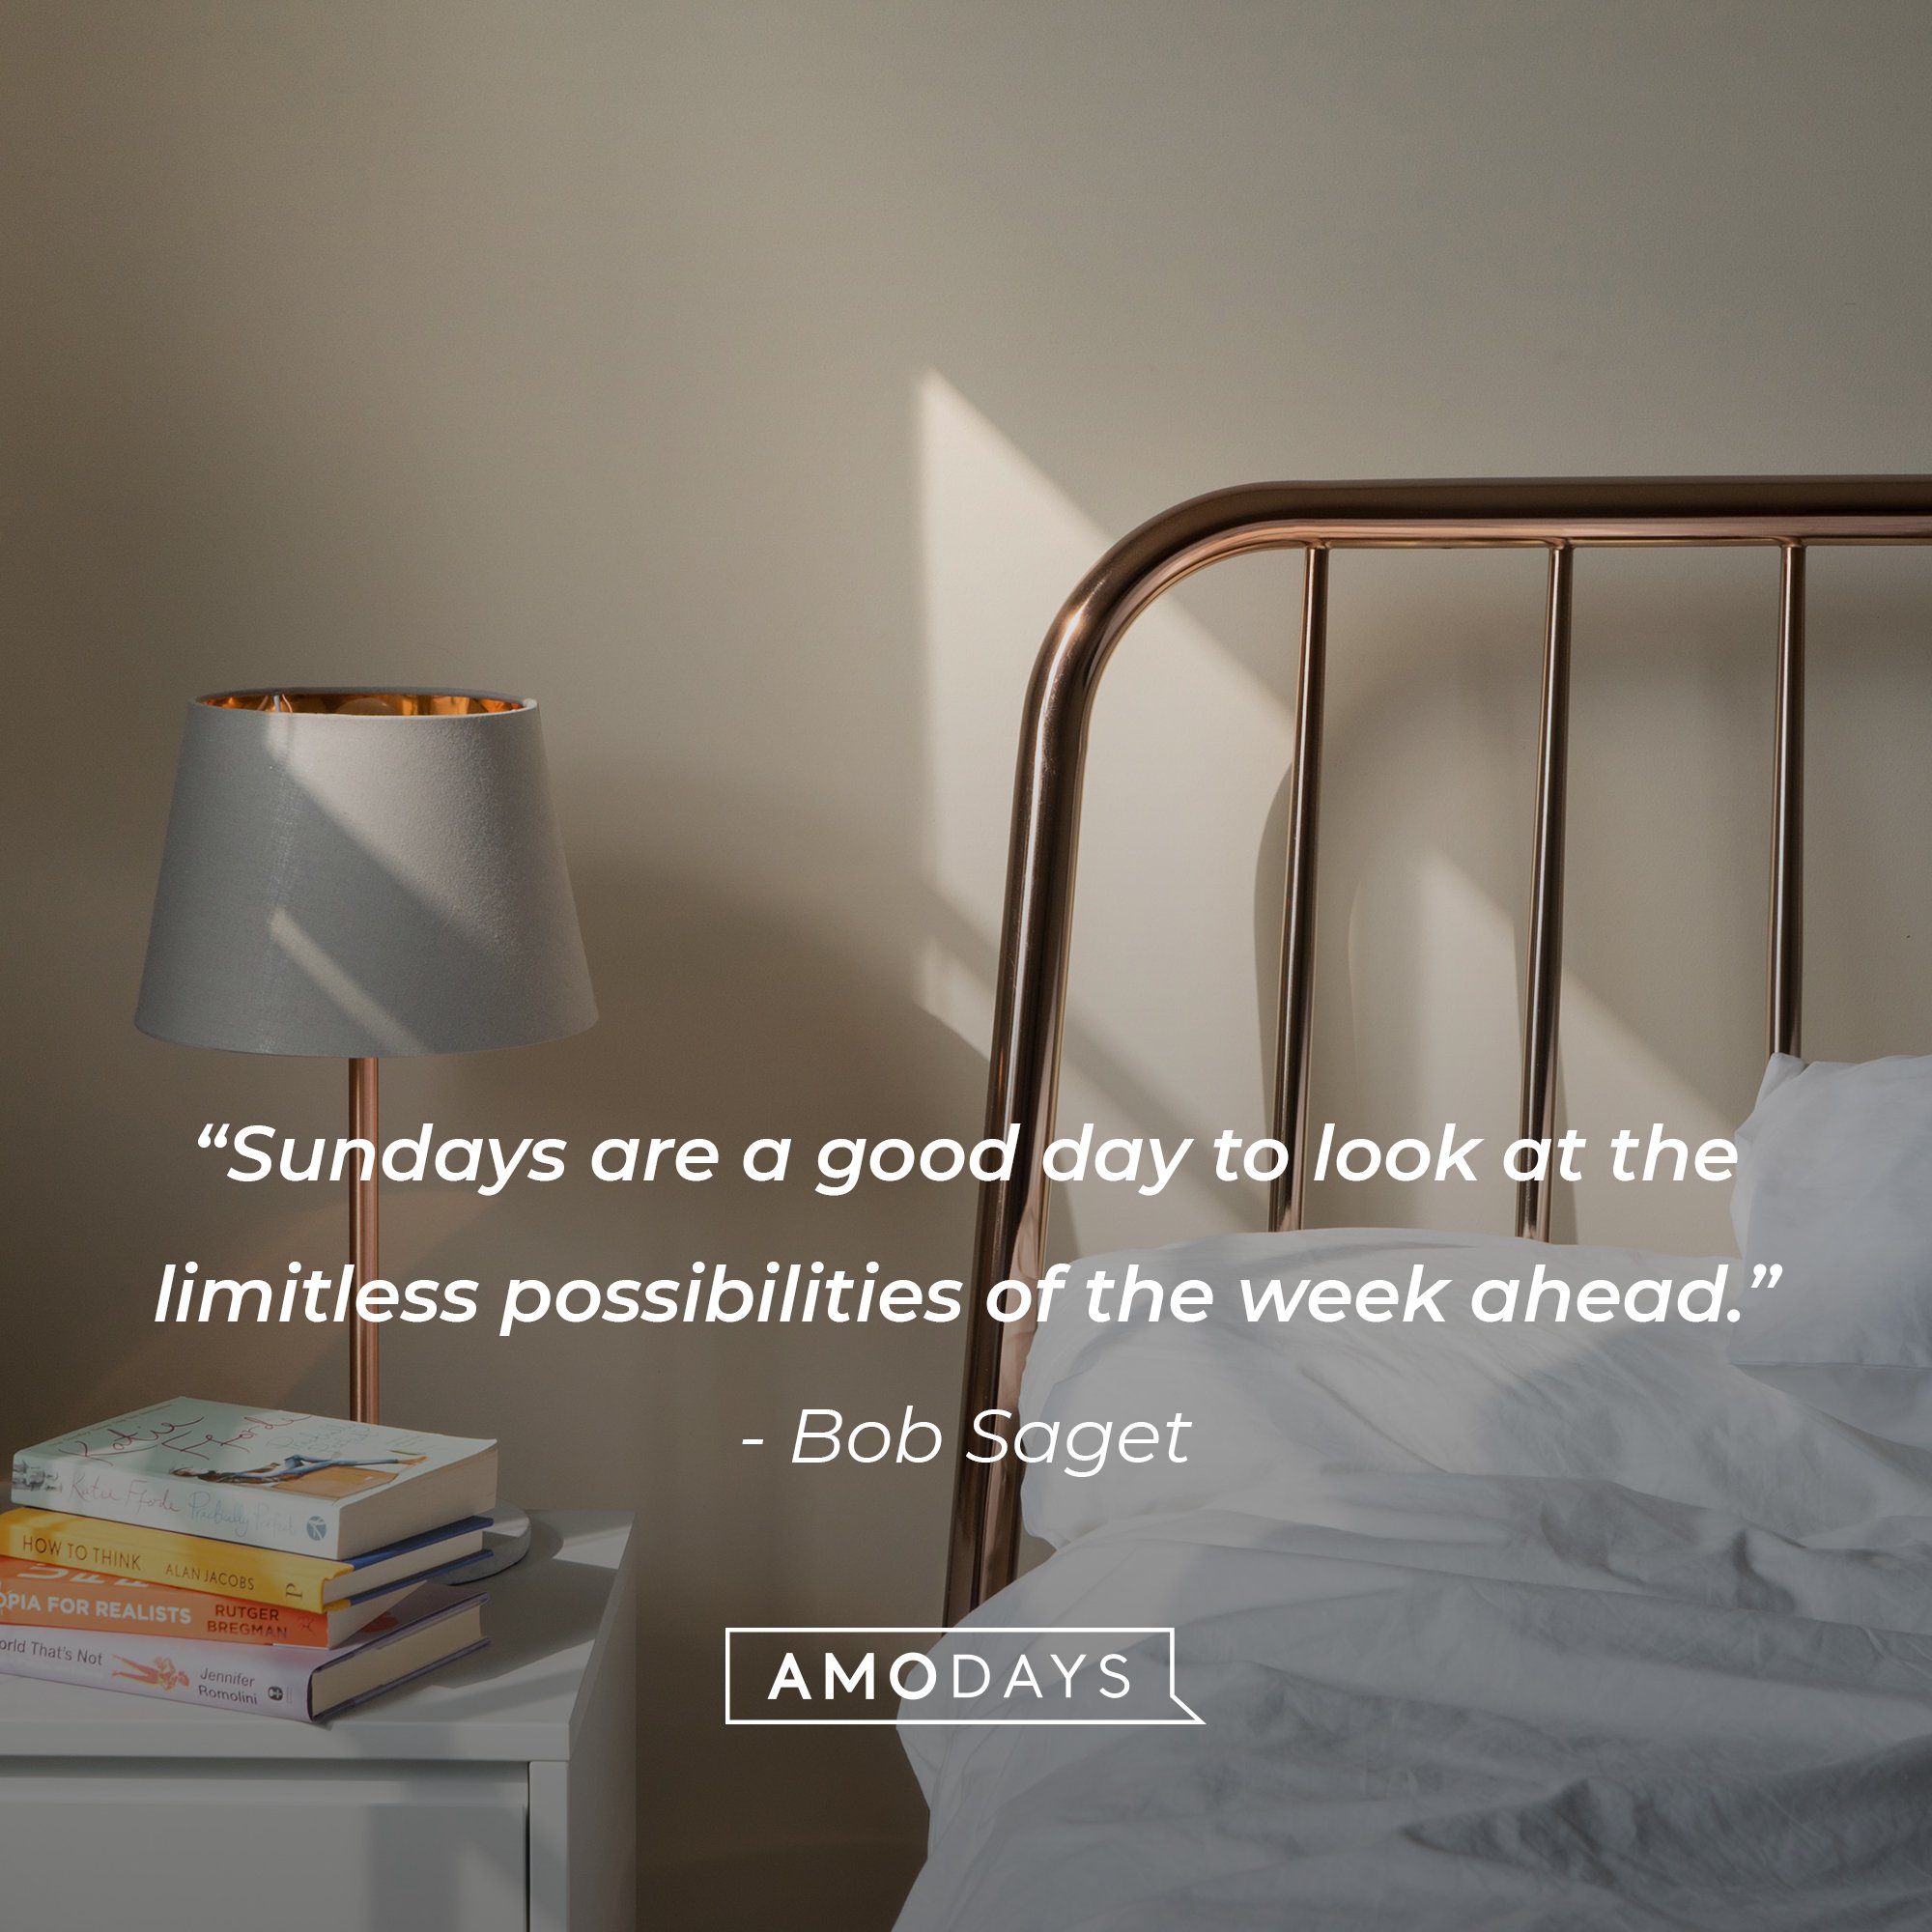  Bob Saget's quote: “Sundays are a good day to look at the limitless possibilities of the week ahead.” | Image: AmoDays